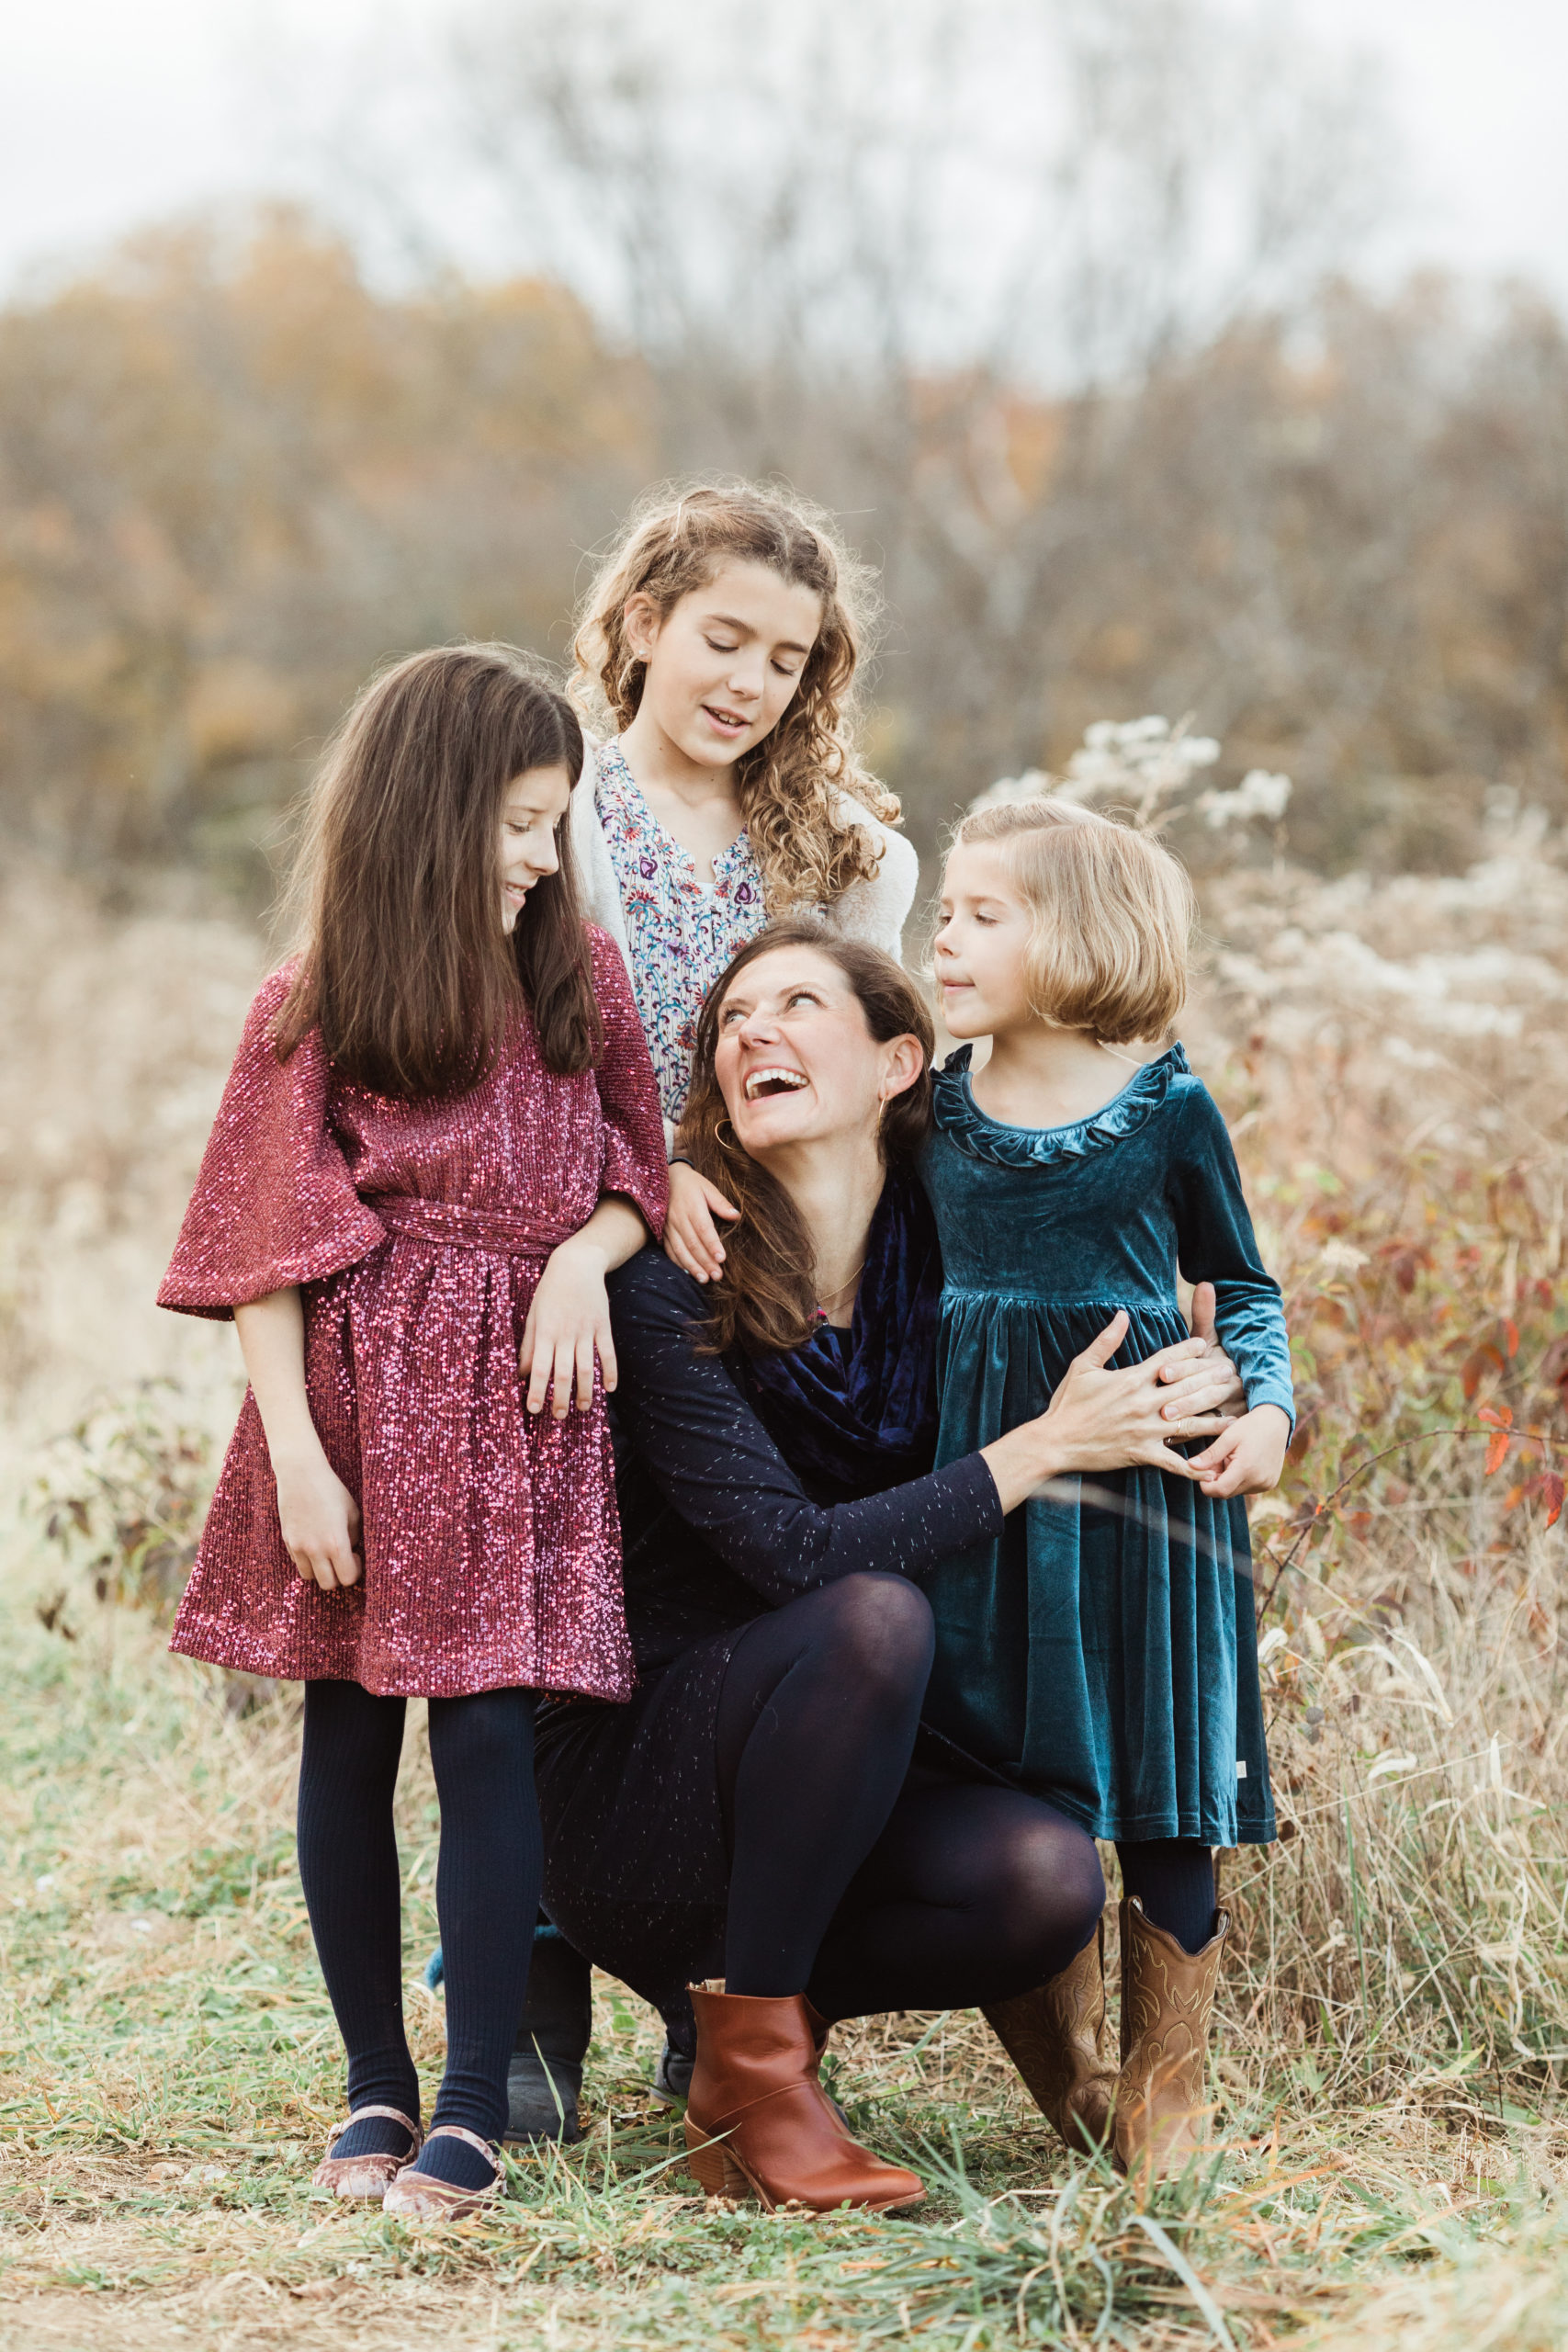 Mom squatting and hugging her daughters. Outdoor fall family photos.